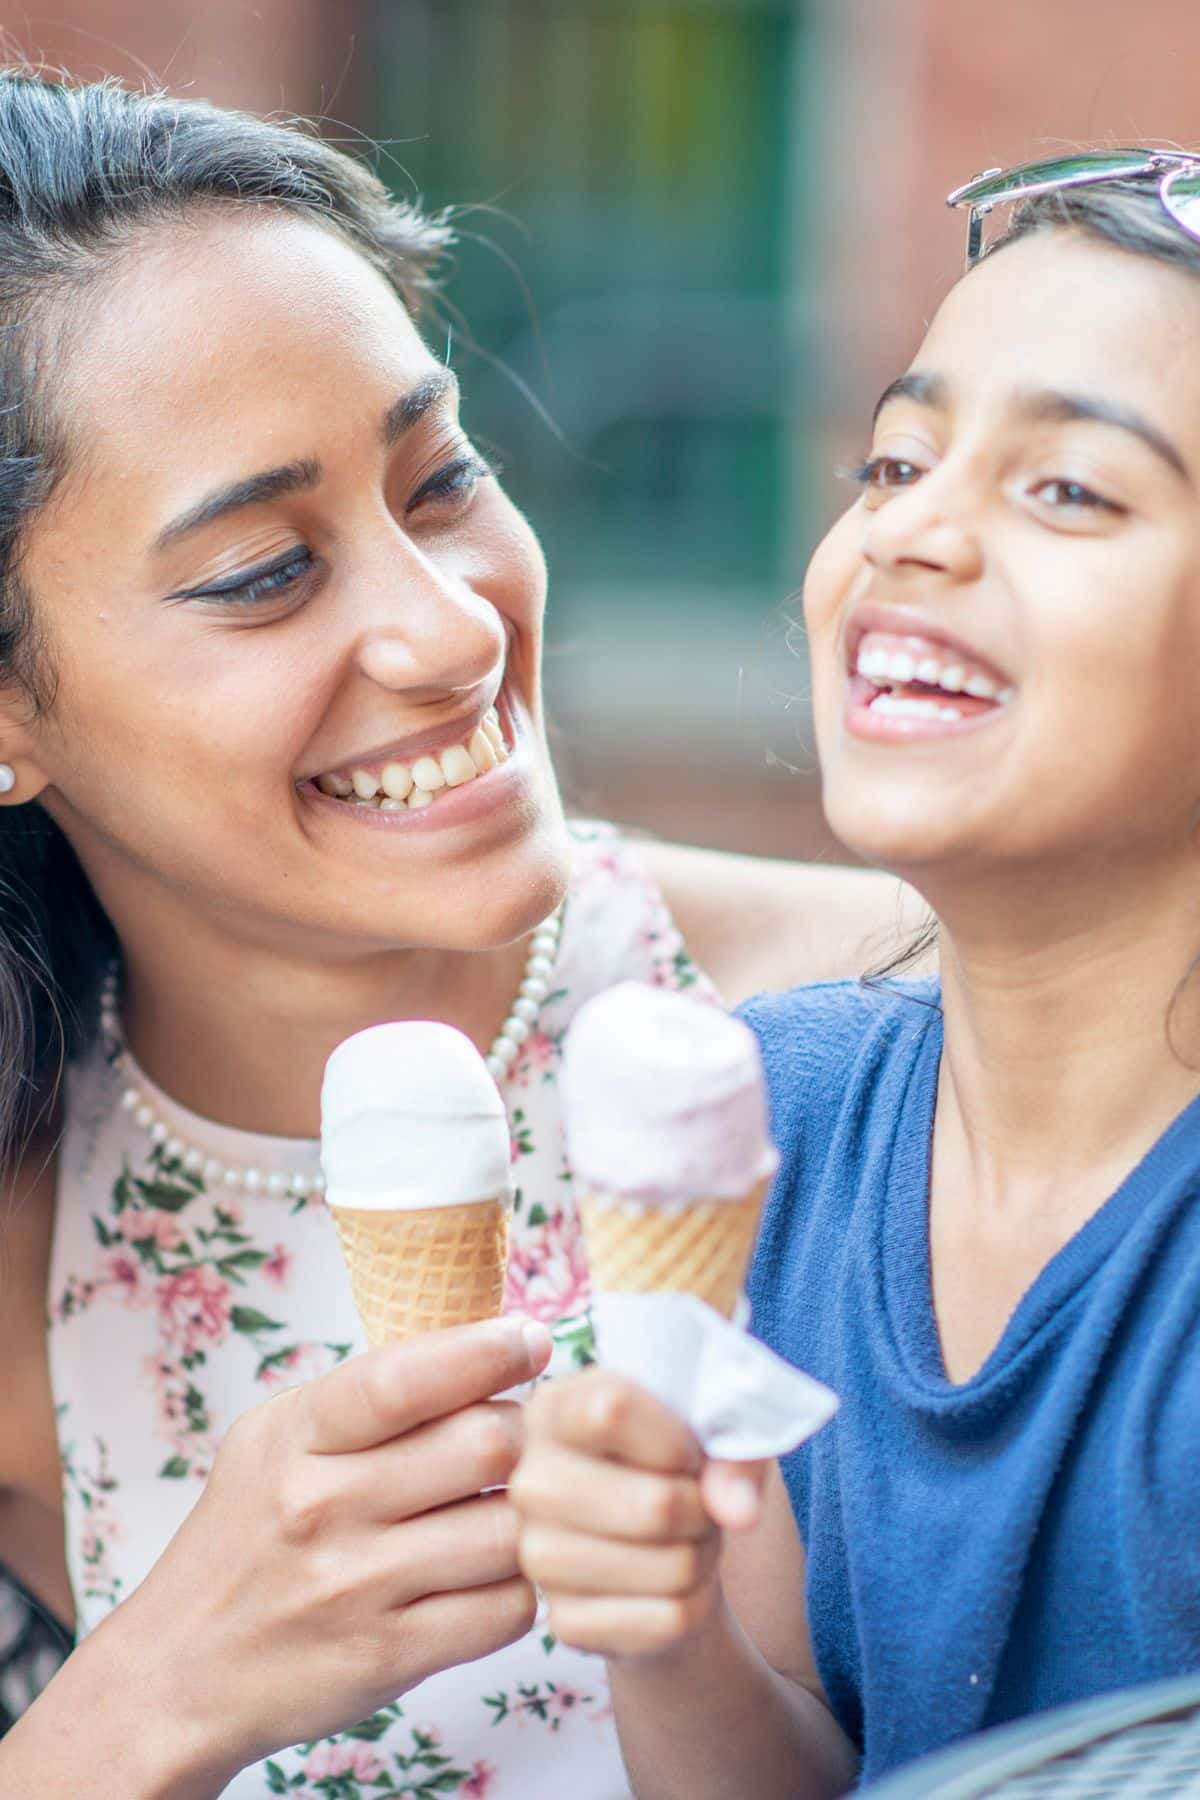 a mother and child enjoying an ice cream cone.